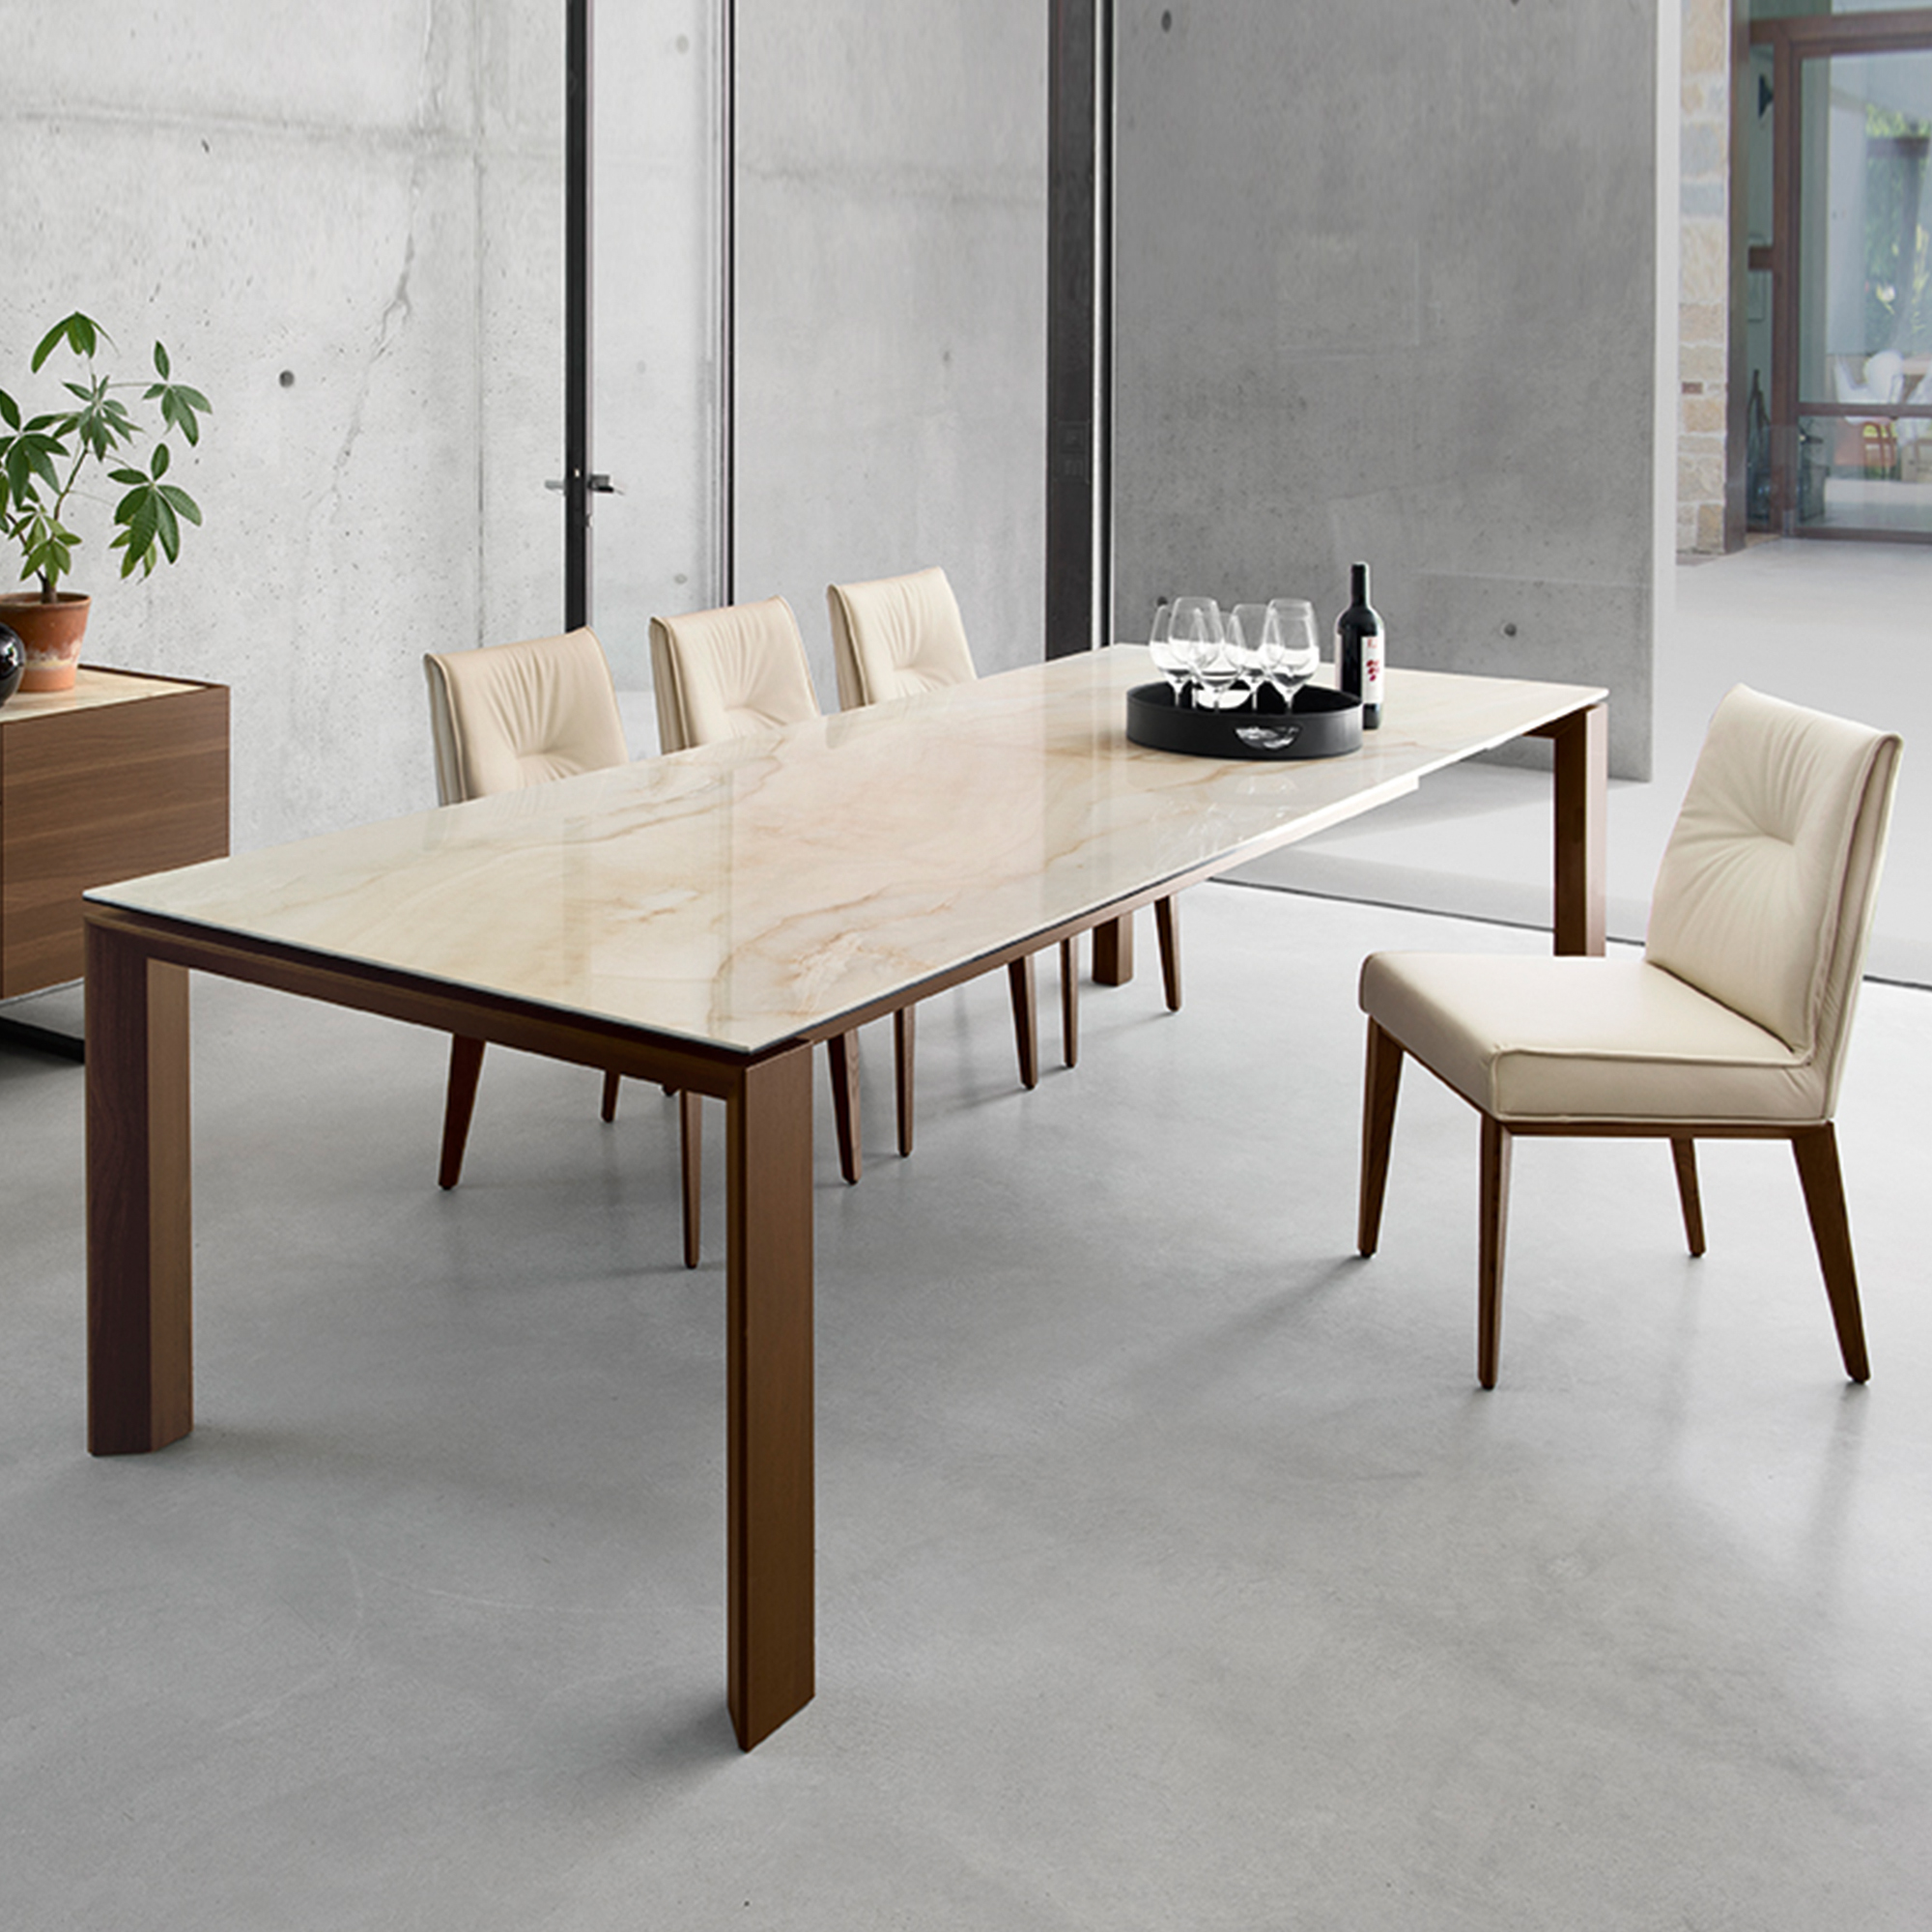 Calligaris table and chairs